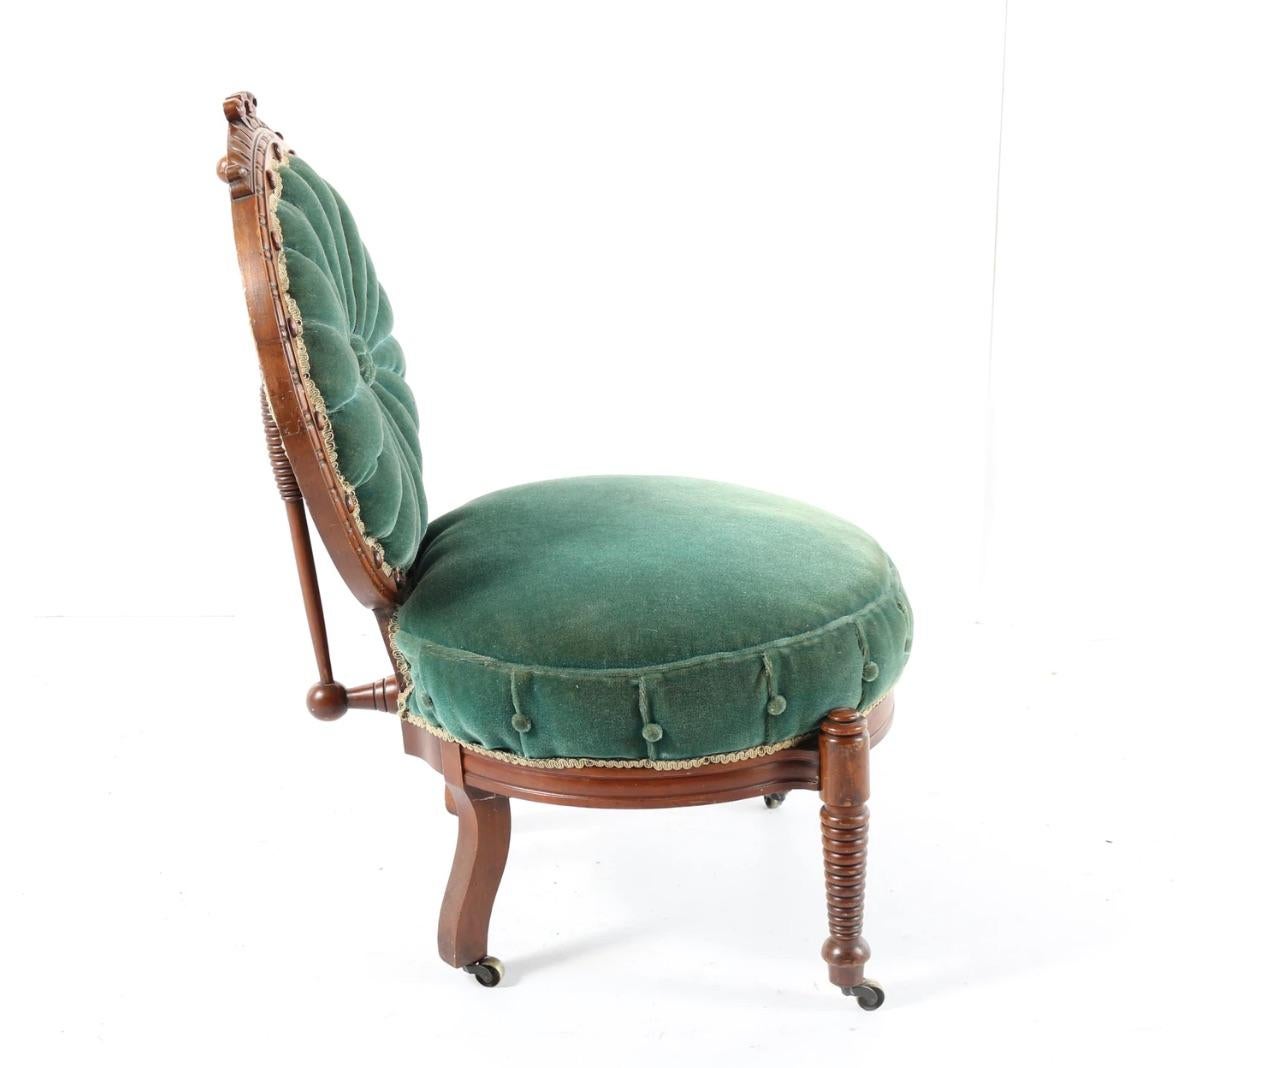 19th Century 1800s Victorian Balloon Back Accent Chair on Casters in Emerald Green Velvet For Sale